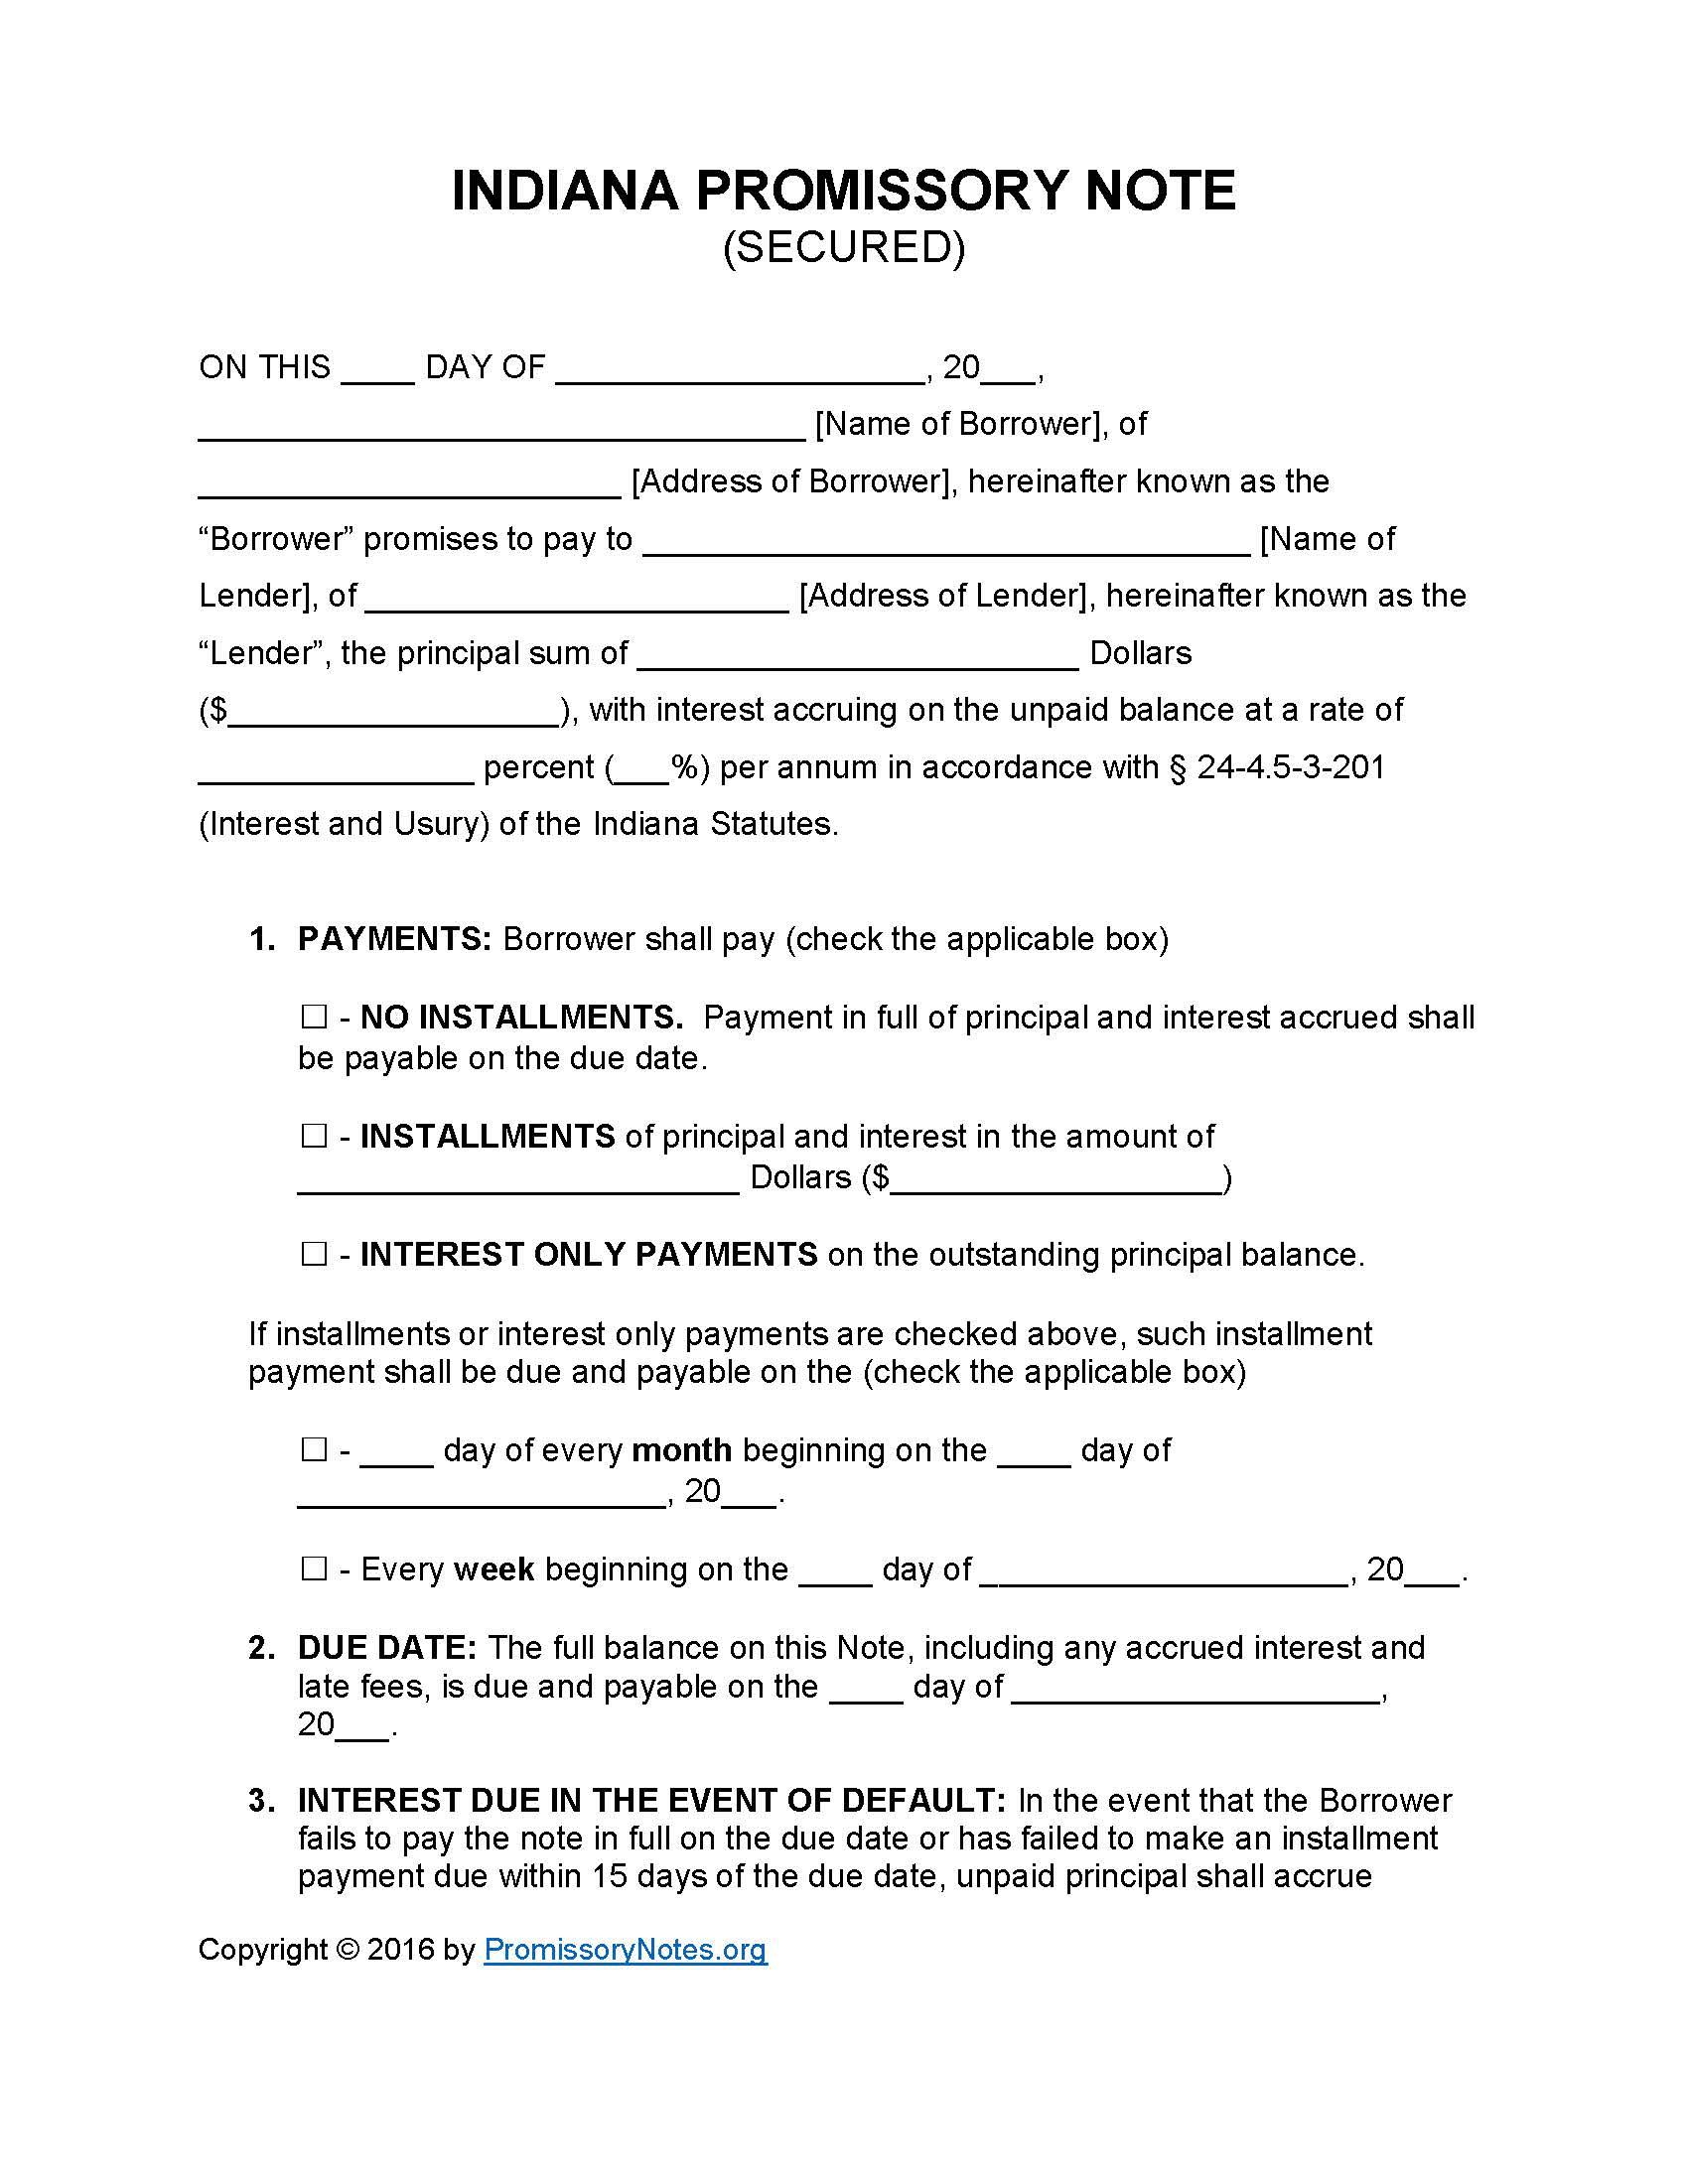 indiana-secured-promissory-note-form